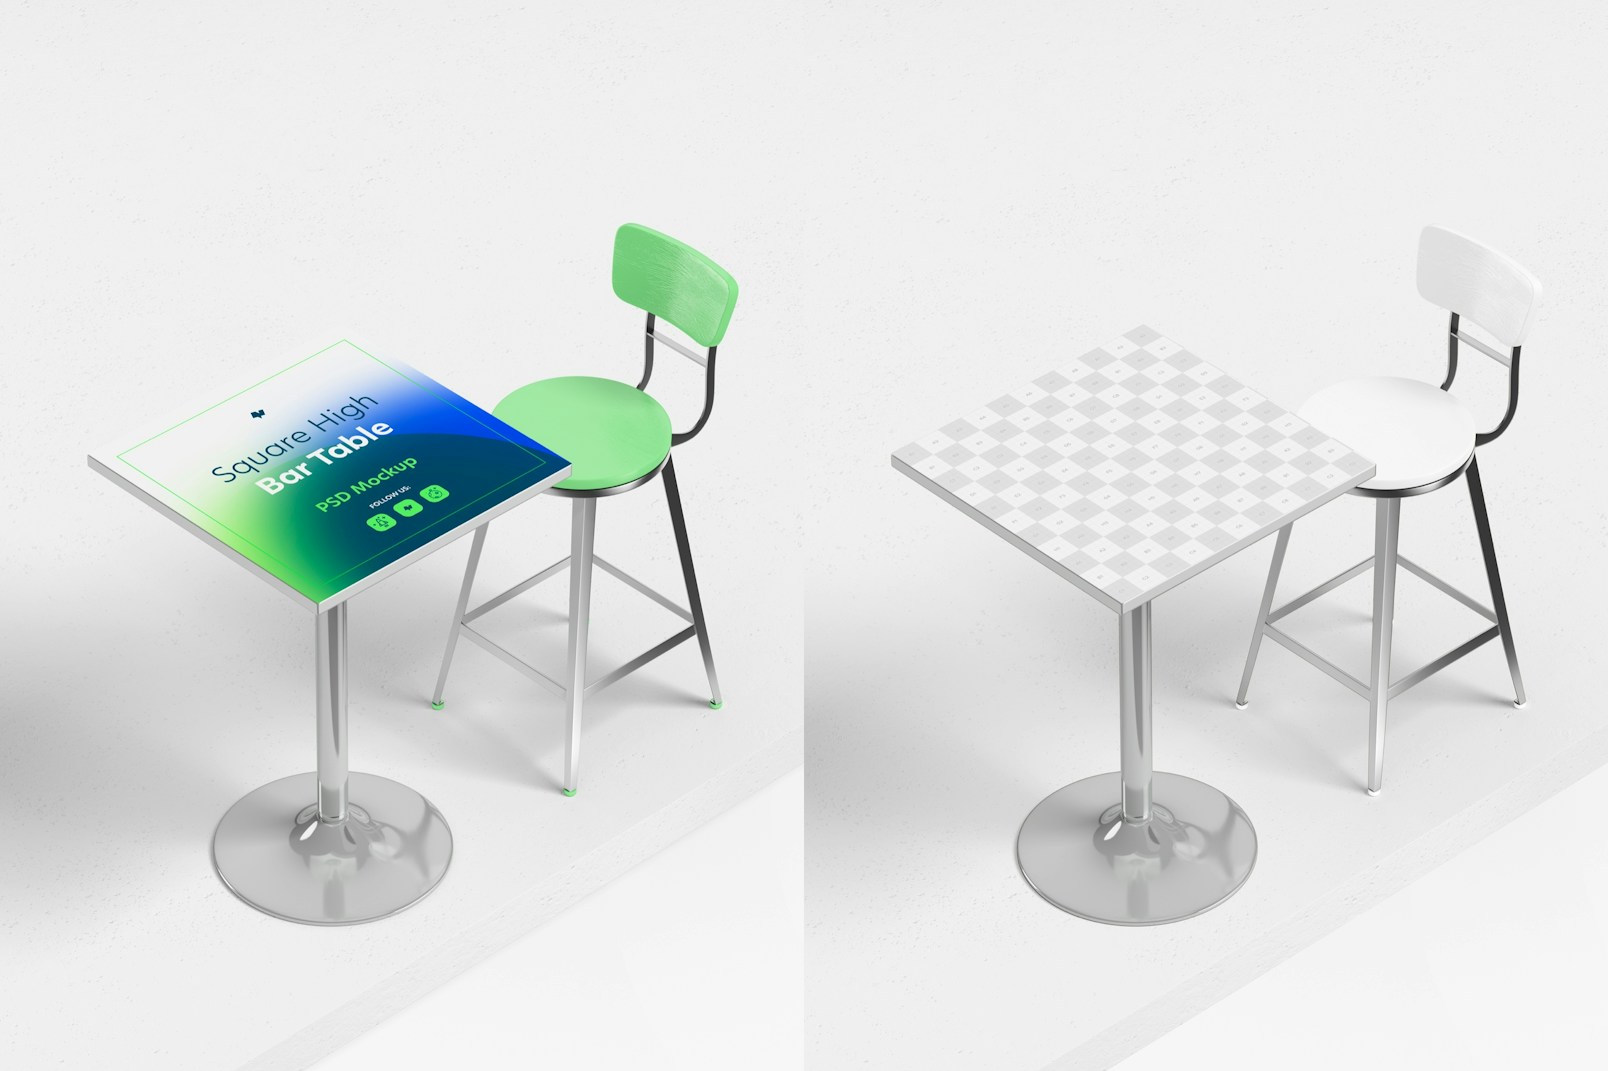 Square High Bar Table with Chair Mockup